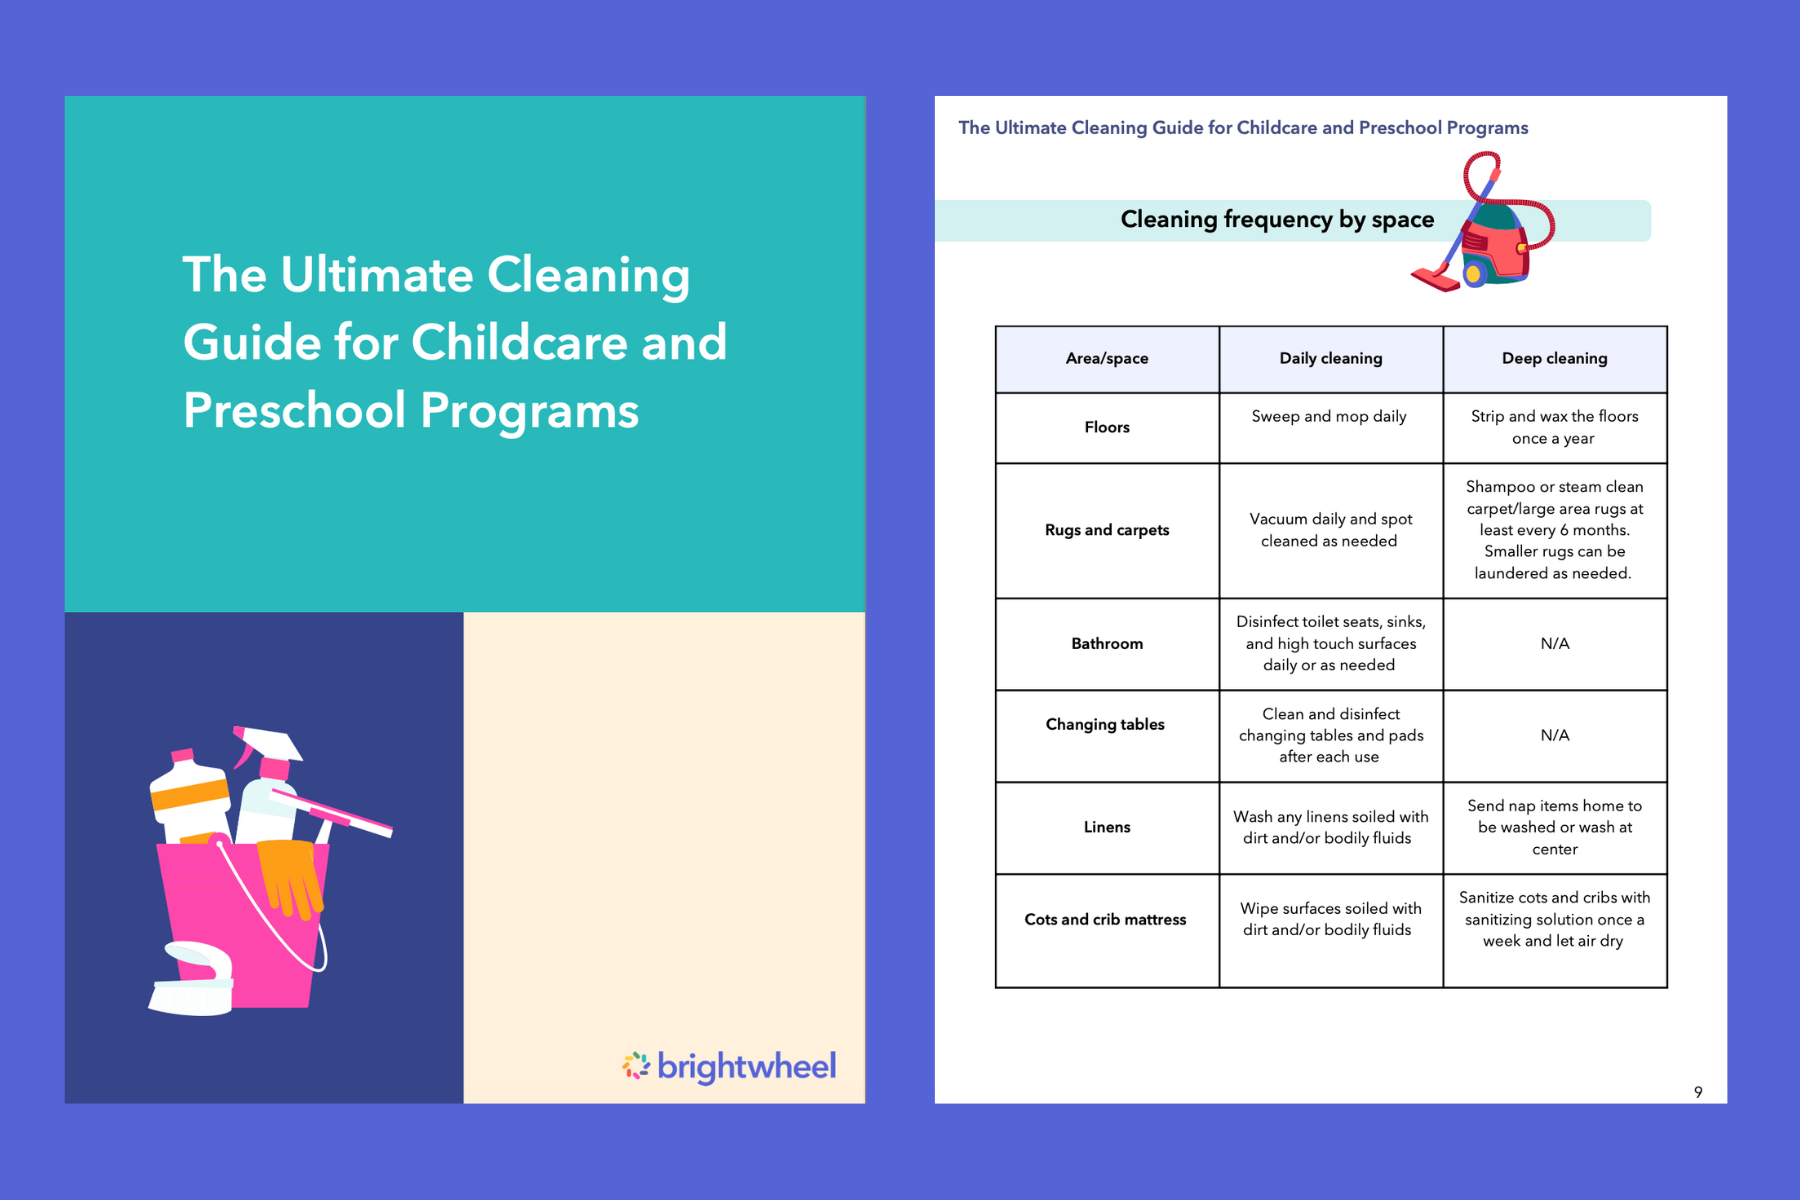 Download The Ultimate Cleaning Guide for Childcare and Preschool Programs